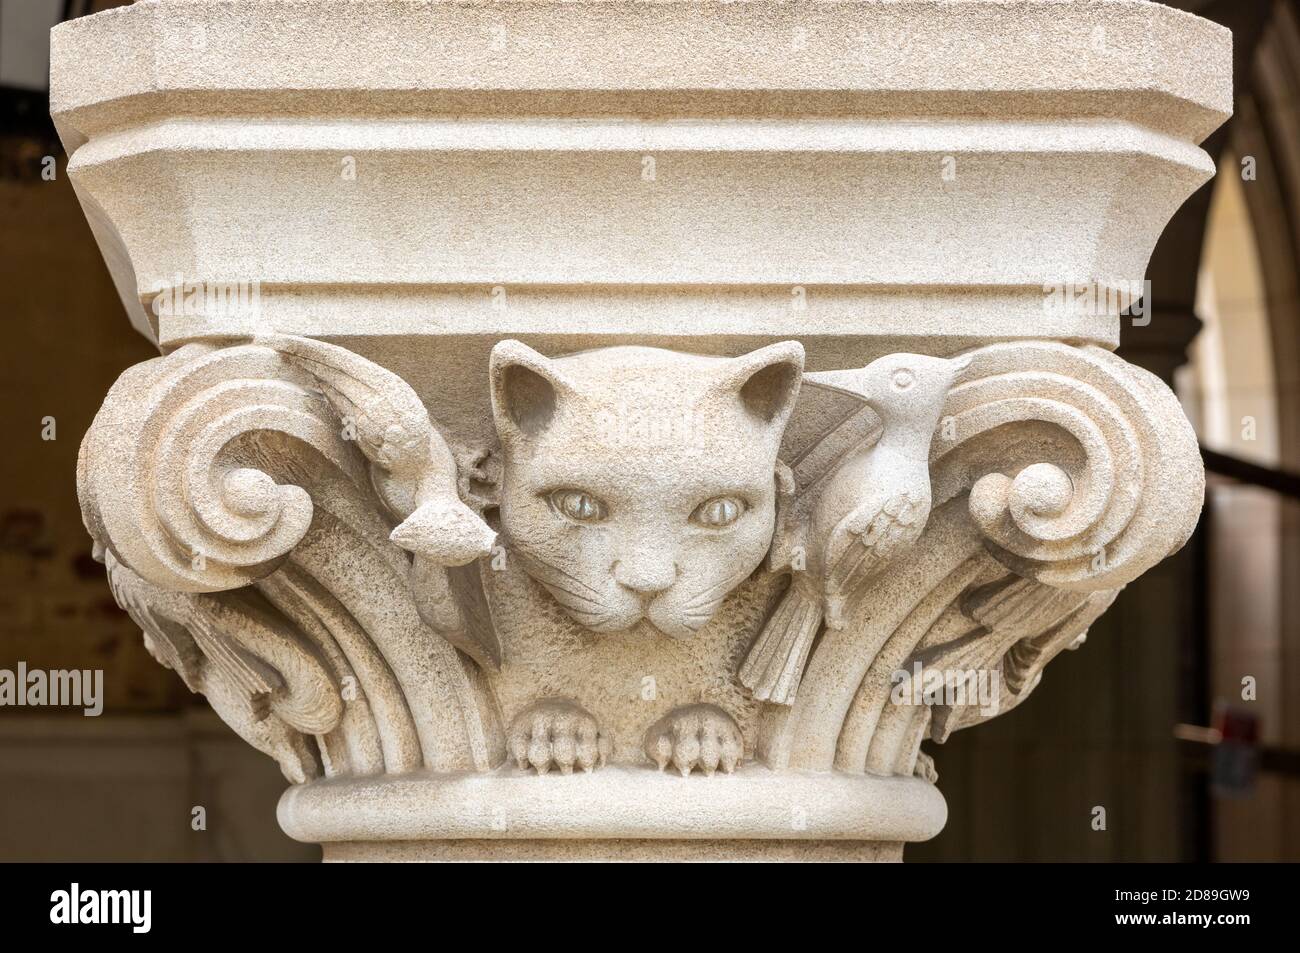 Cat and birds sculpture; one of the many sculptured cat grotesques in Washington National Cathedral, Washington DC Stock Photo